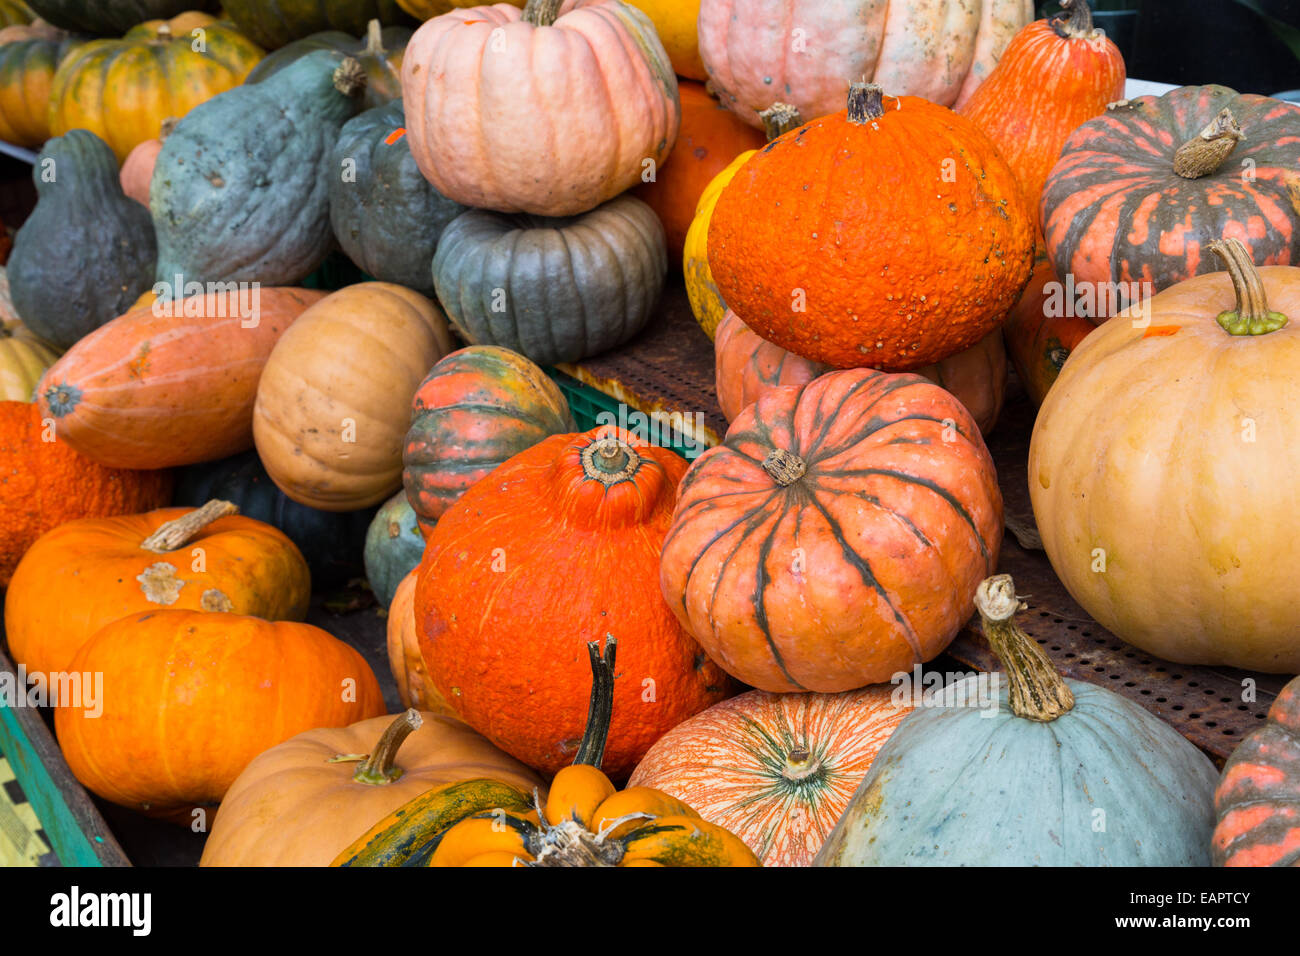 various vegetables at a market stall Stock Photo